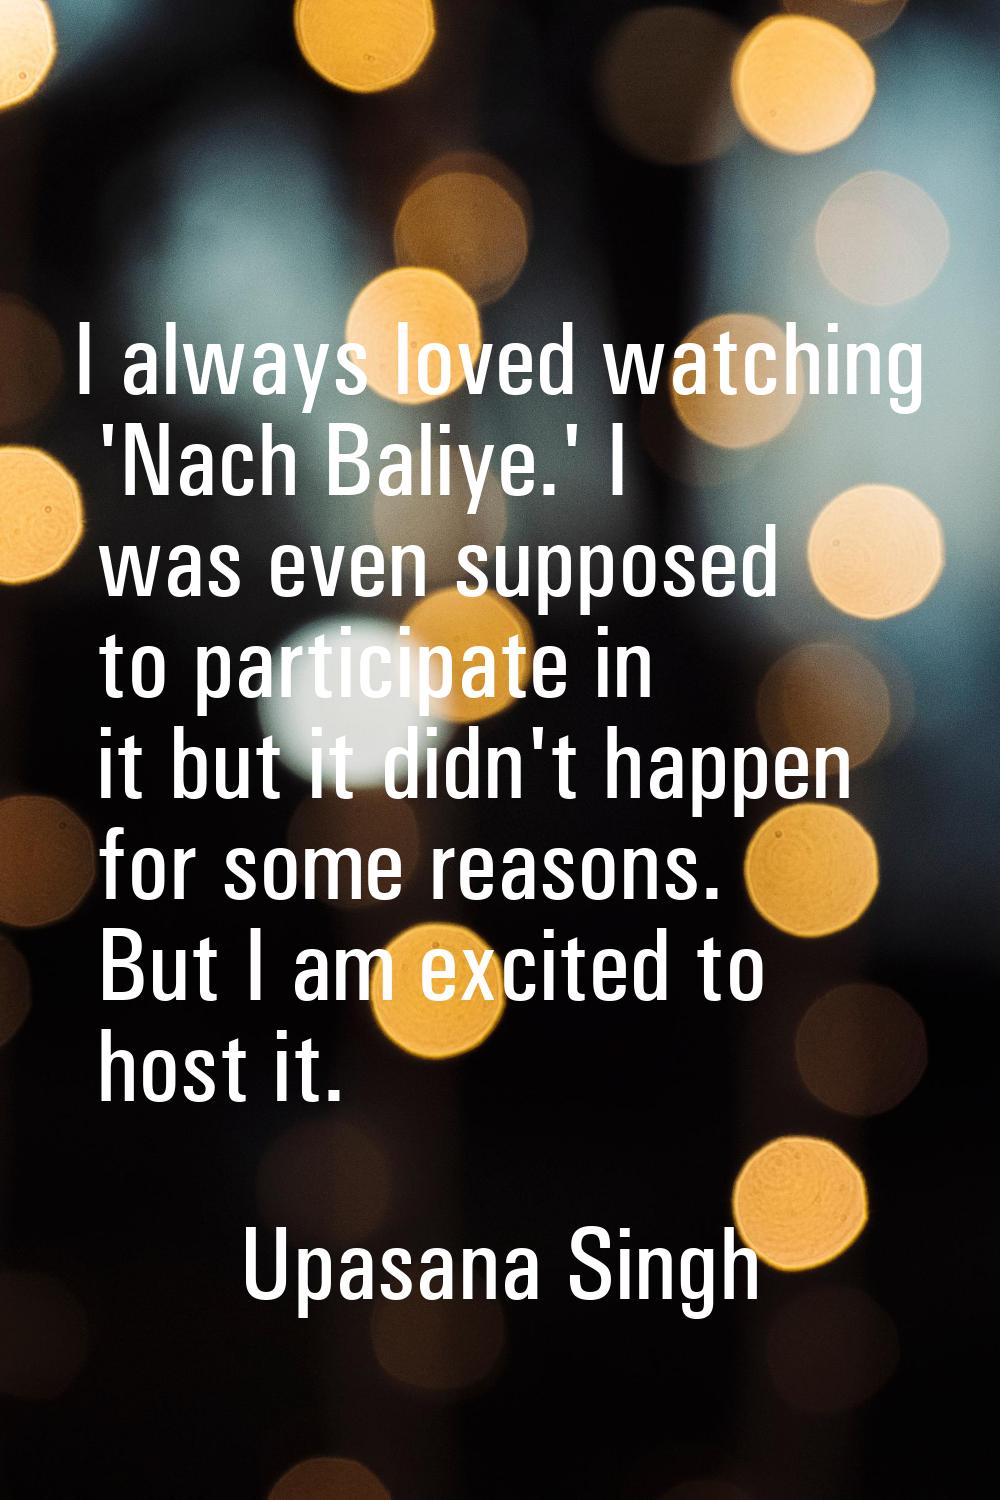 I always loved watching 'Nach Baliye.' I was even supposed to participate in it but it didn't happe